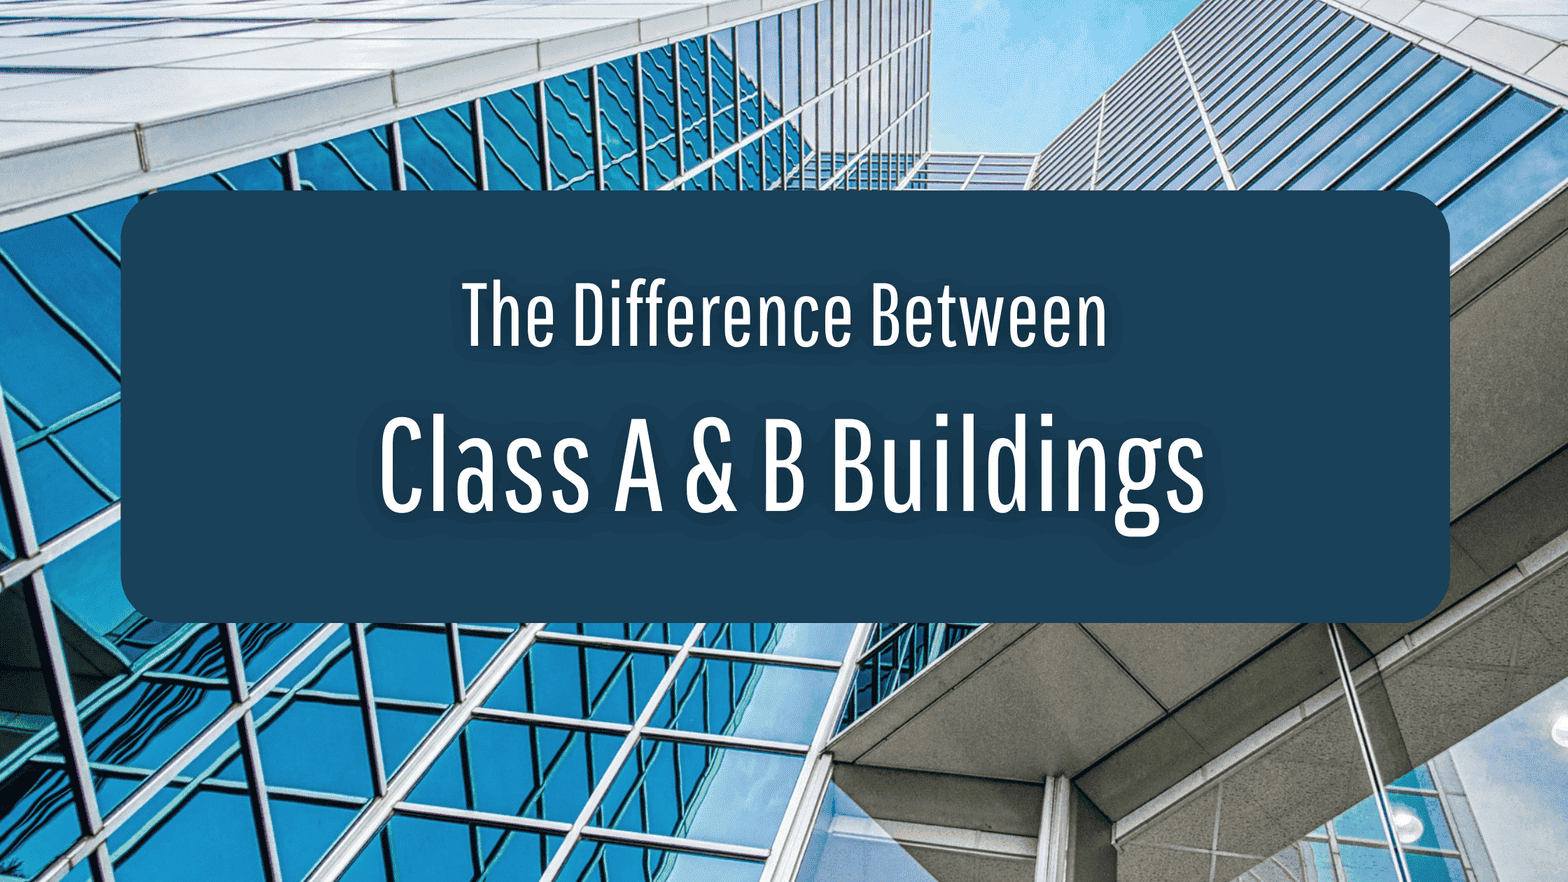 The Difference Between Class A & B Buildings